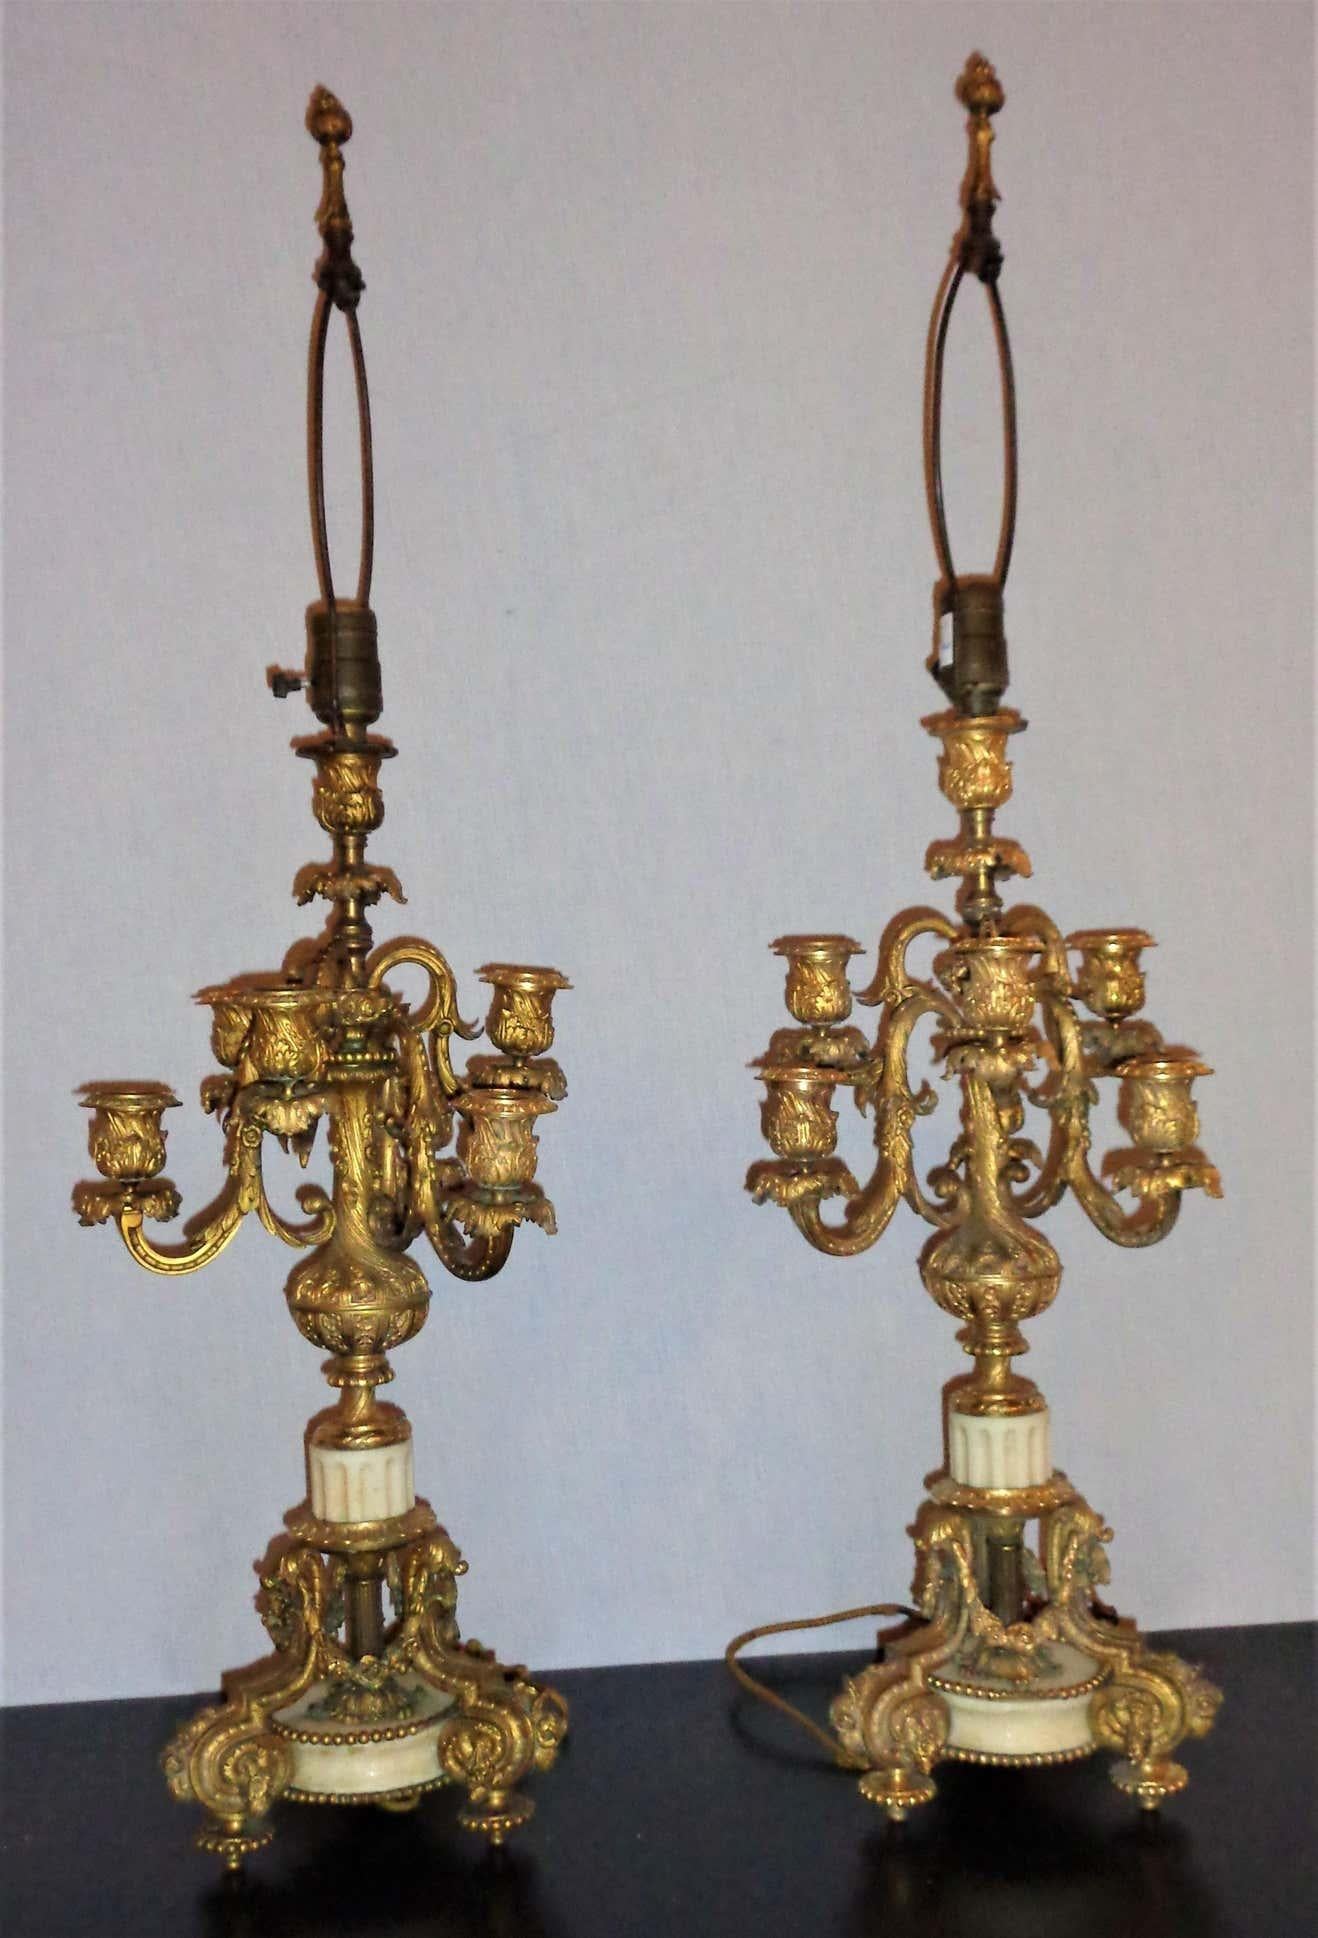 Pair of 19th Century Doré Bronze 7-Light Marble Base Candelabras Mounted as Lamp For Sale 9